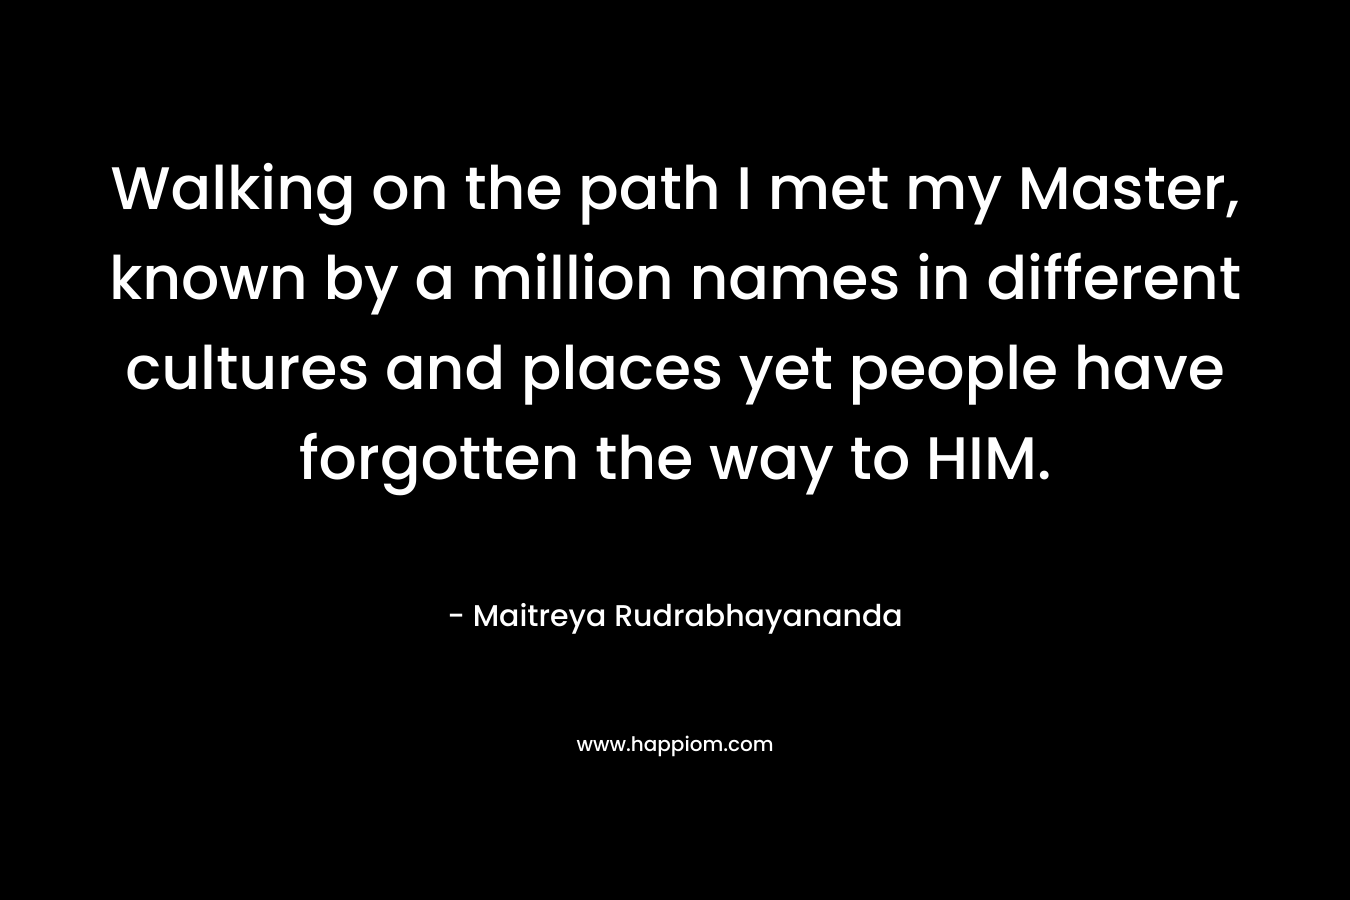 Walking on the path I met my Master, known by a million names in different cultures and places yet people have forgotten the way to HIM.